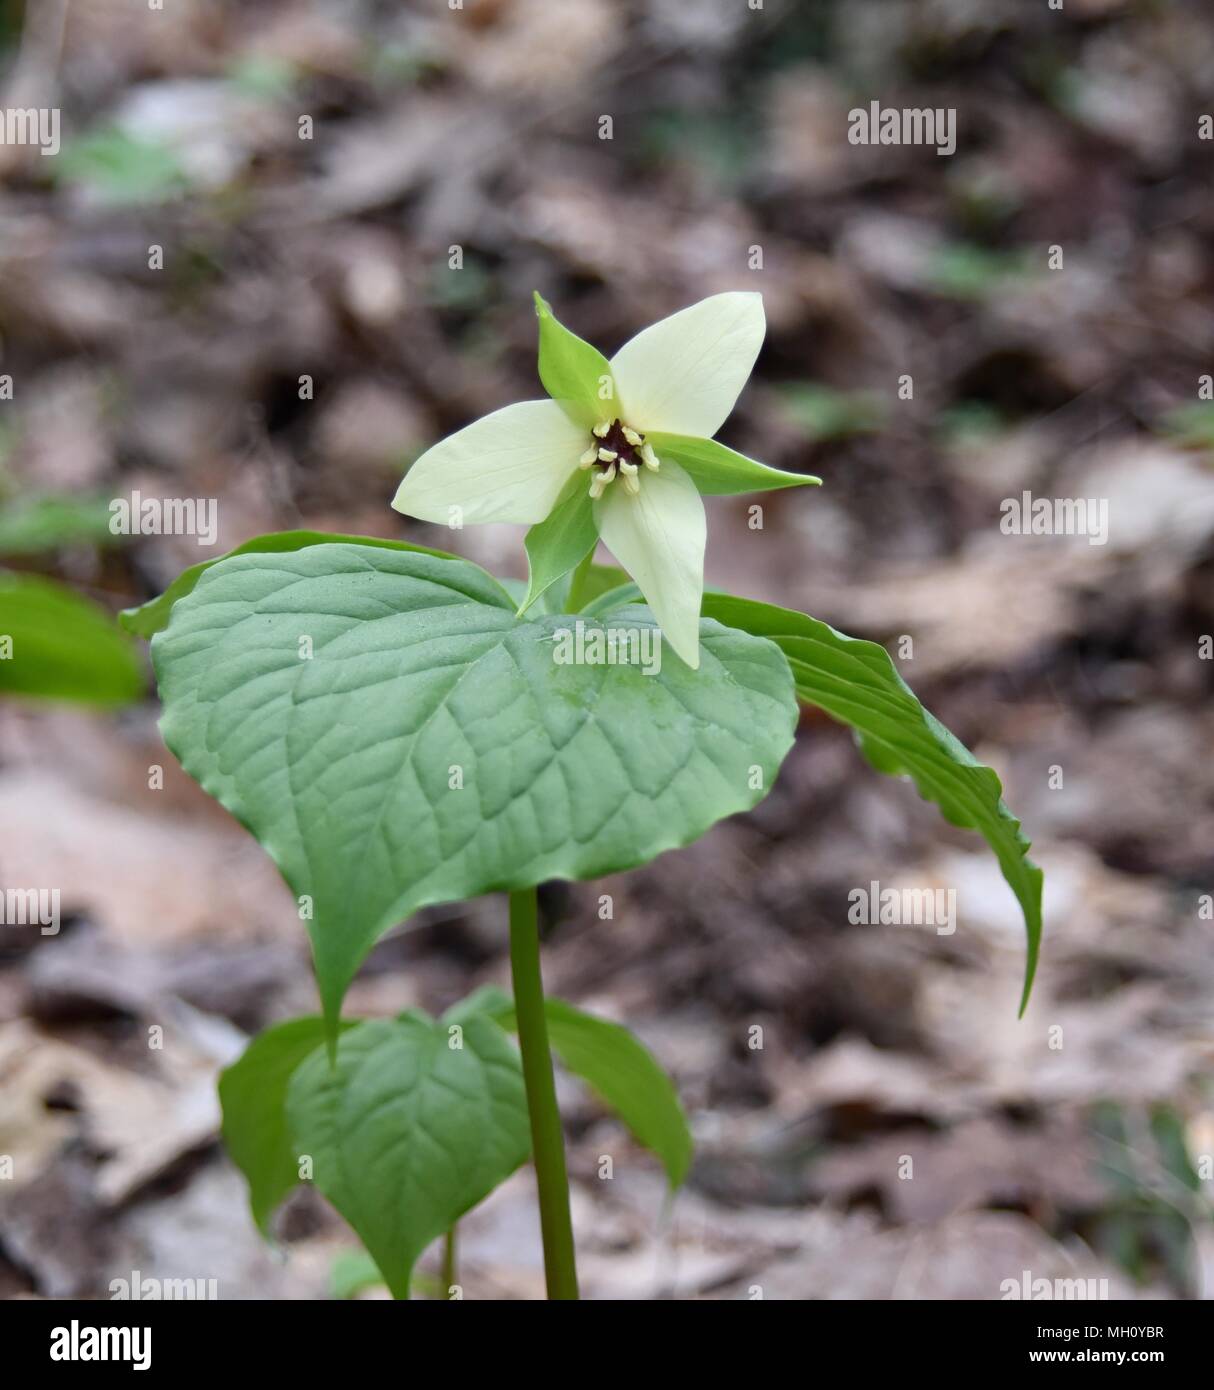 Unusual pale yellow flower on a red trillium plant emerging in a spring forest. Stock Photo